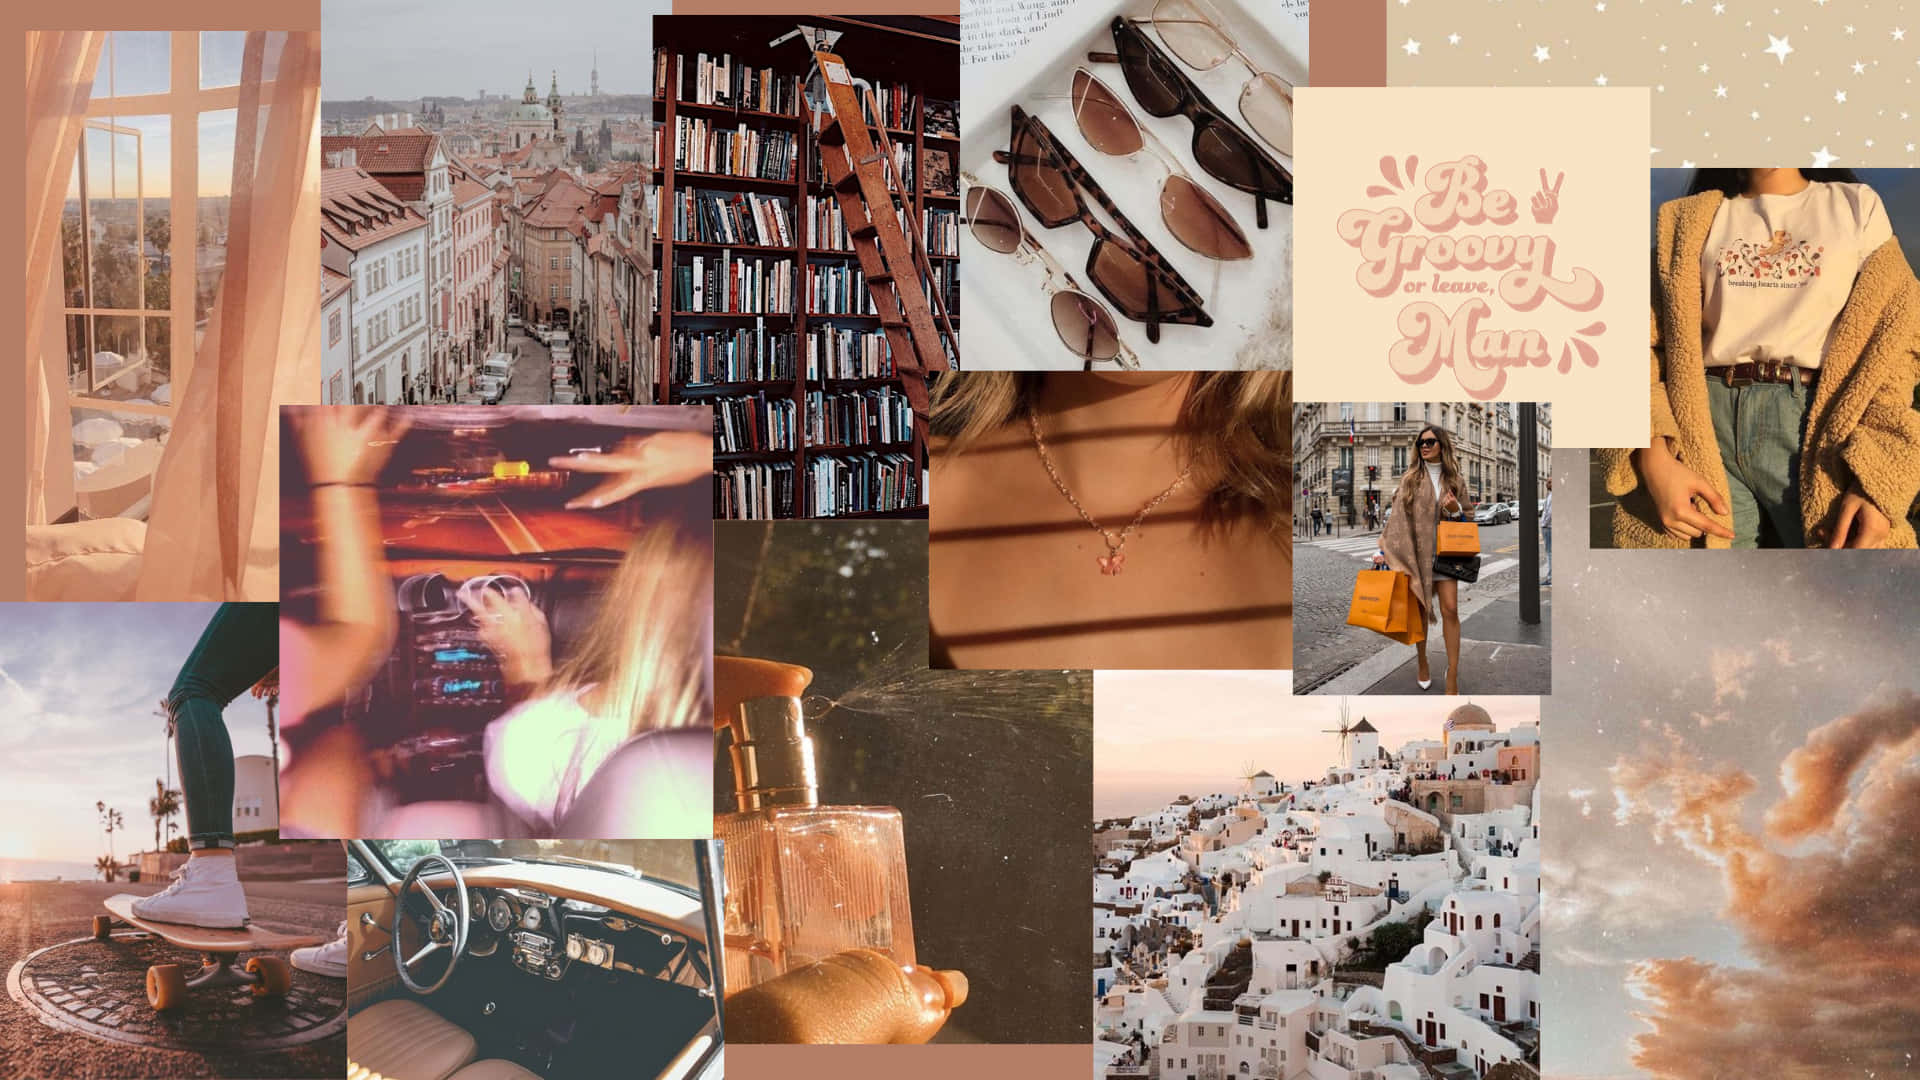 "Explore the Digital Aesthetic with a Laptop Collage" Wallpaper